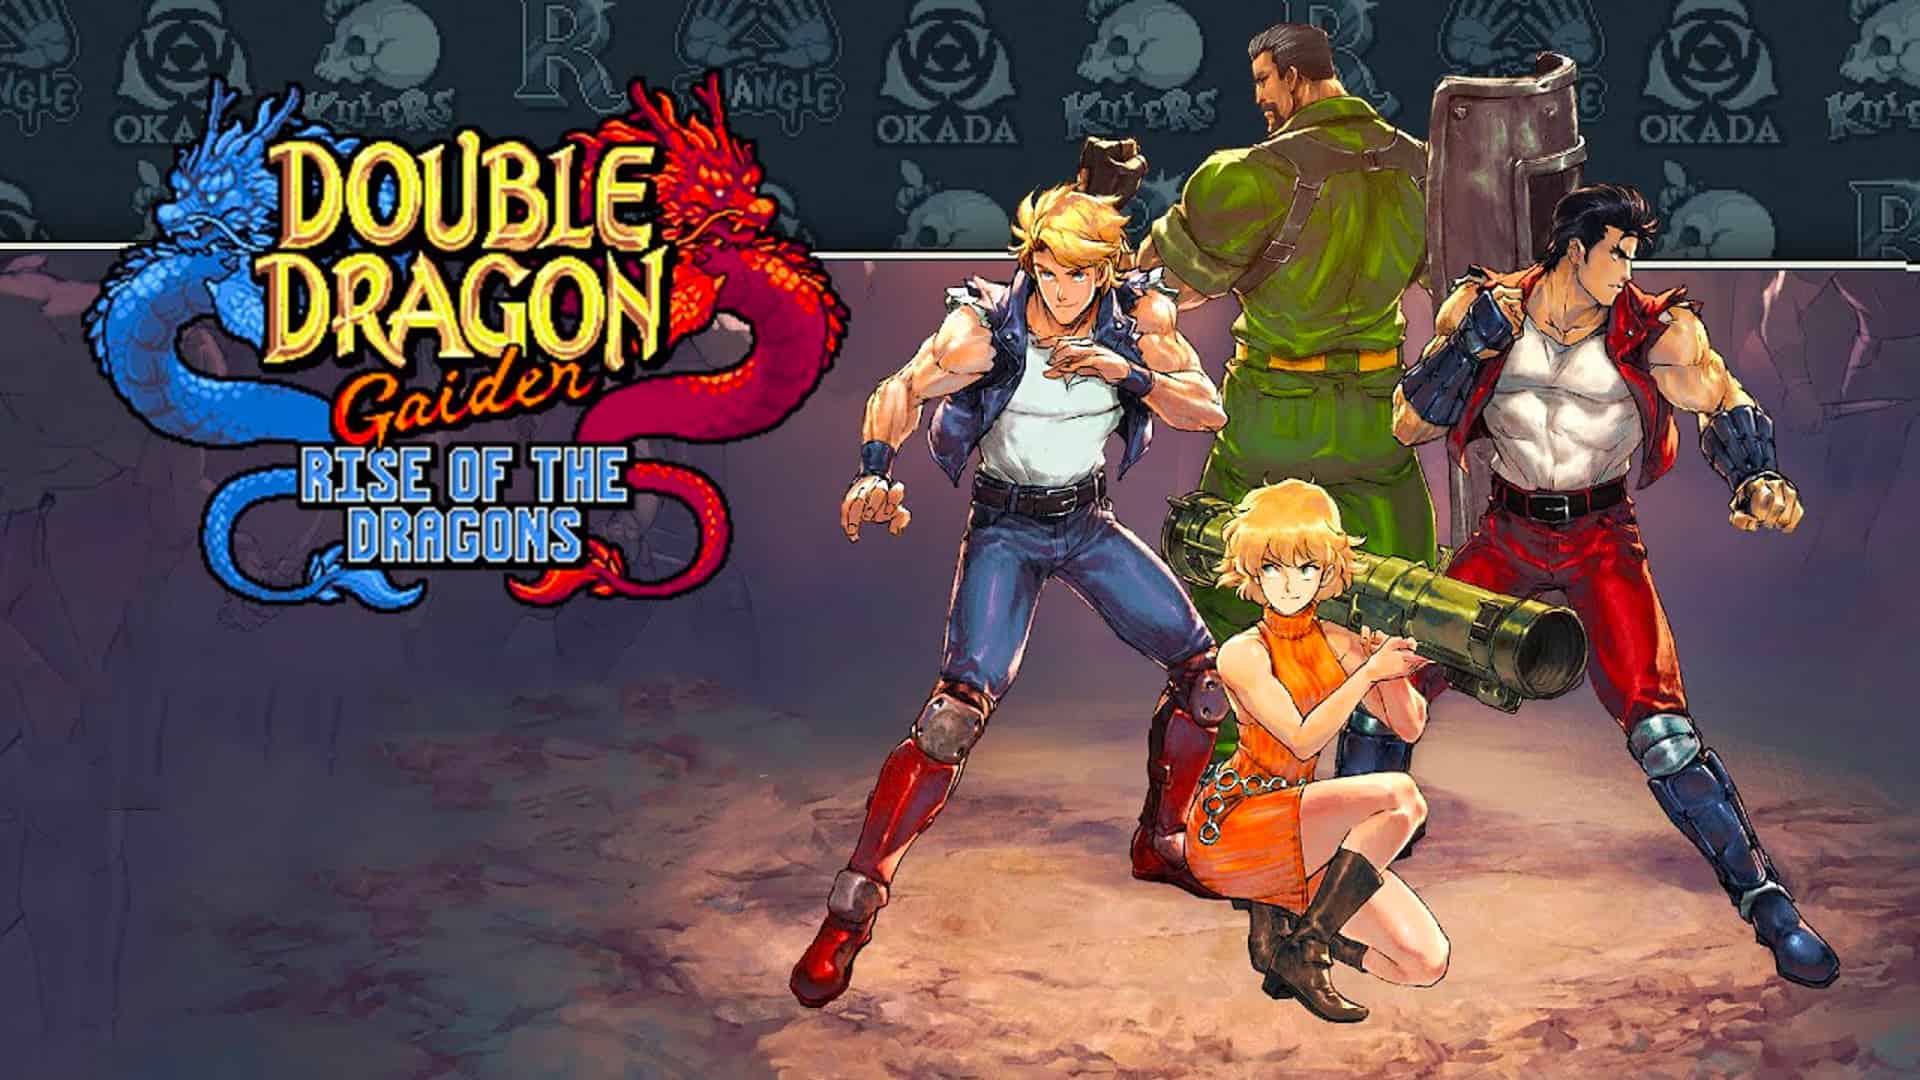 Double Dragon Gaiden: Rise of the Dragons Review – Good Fun, but